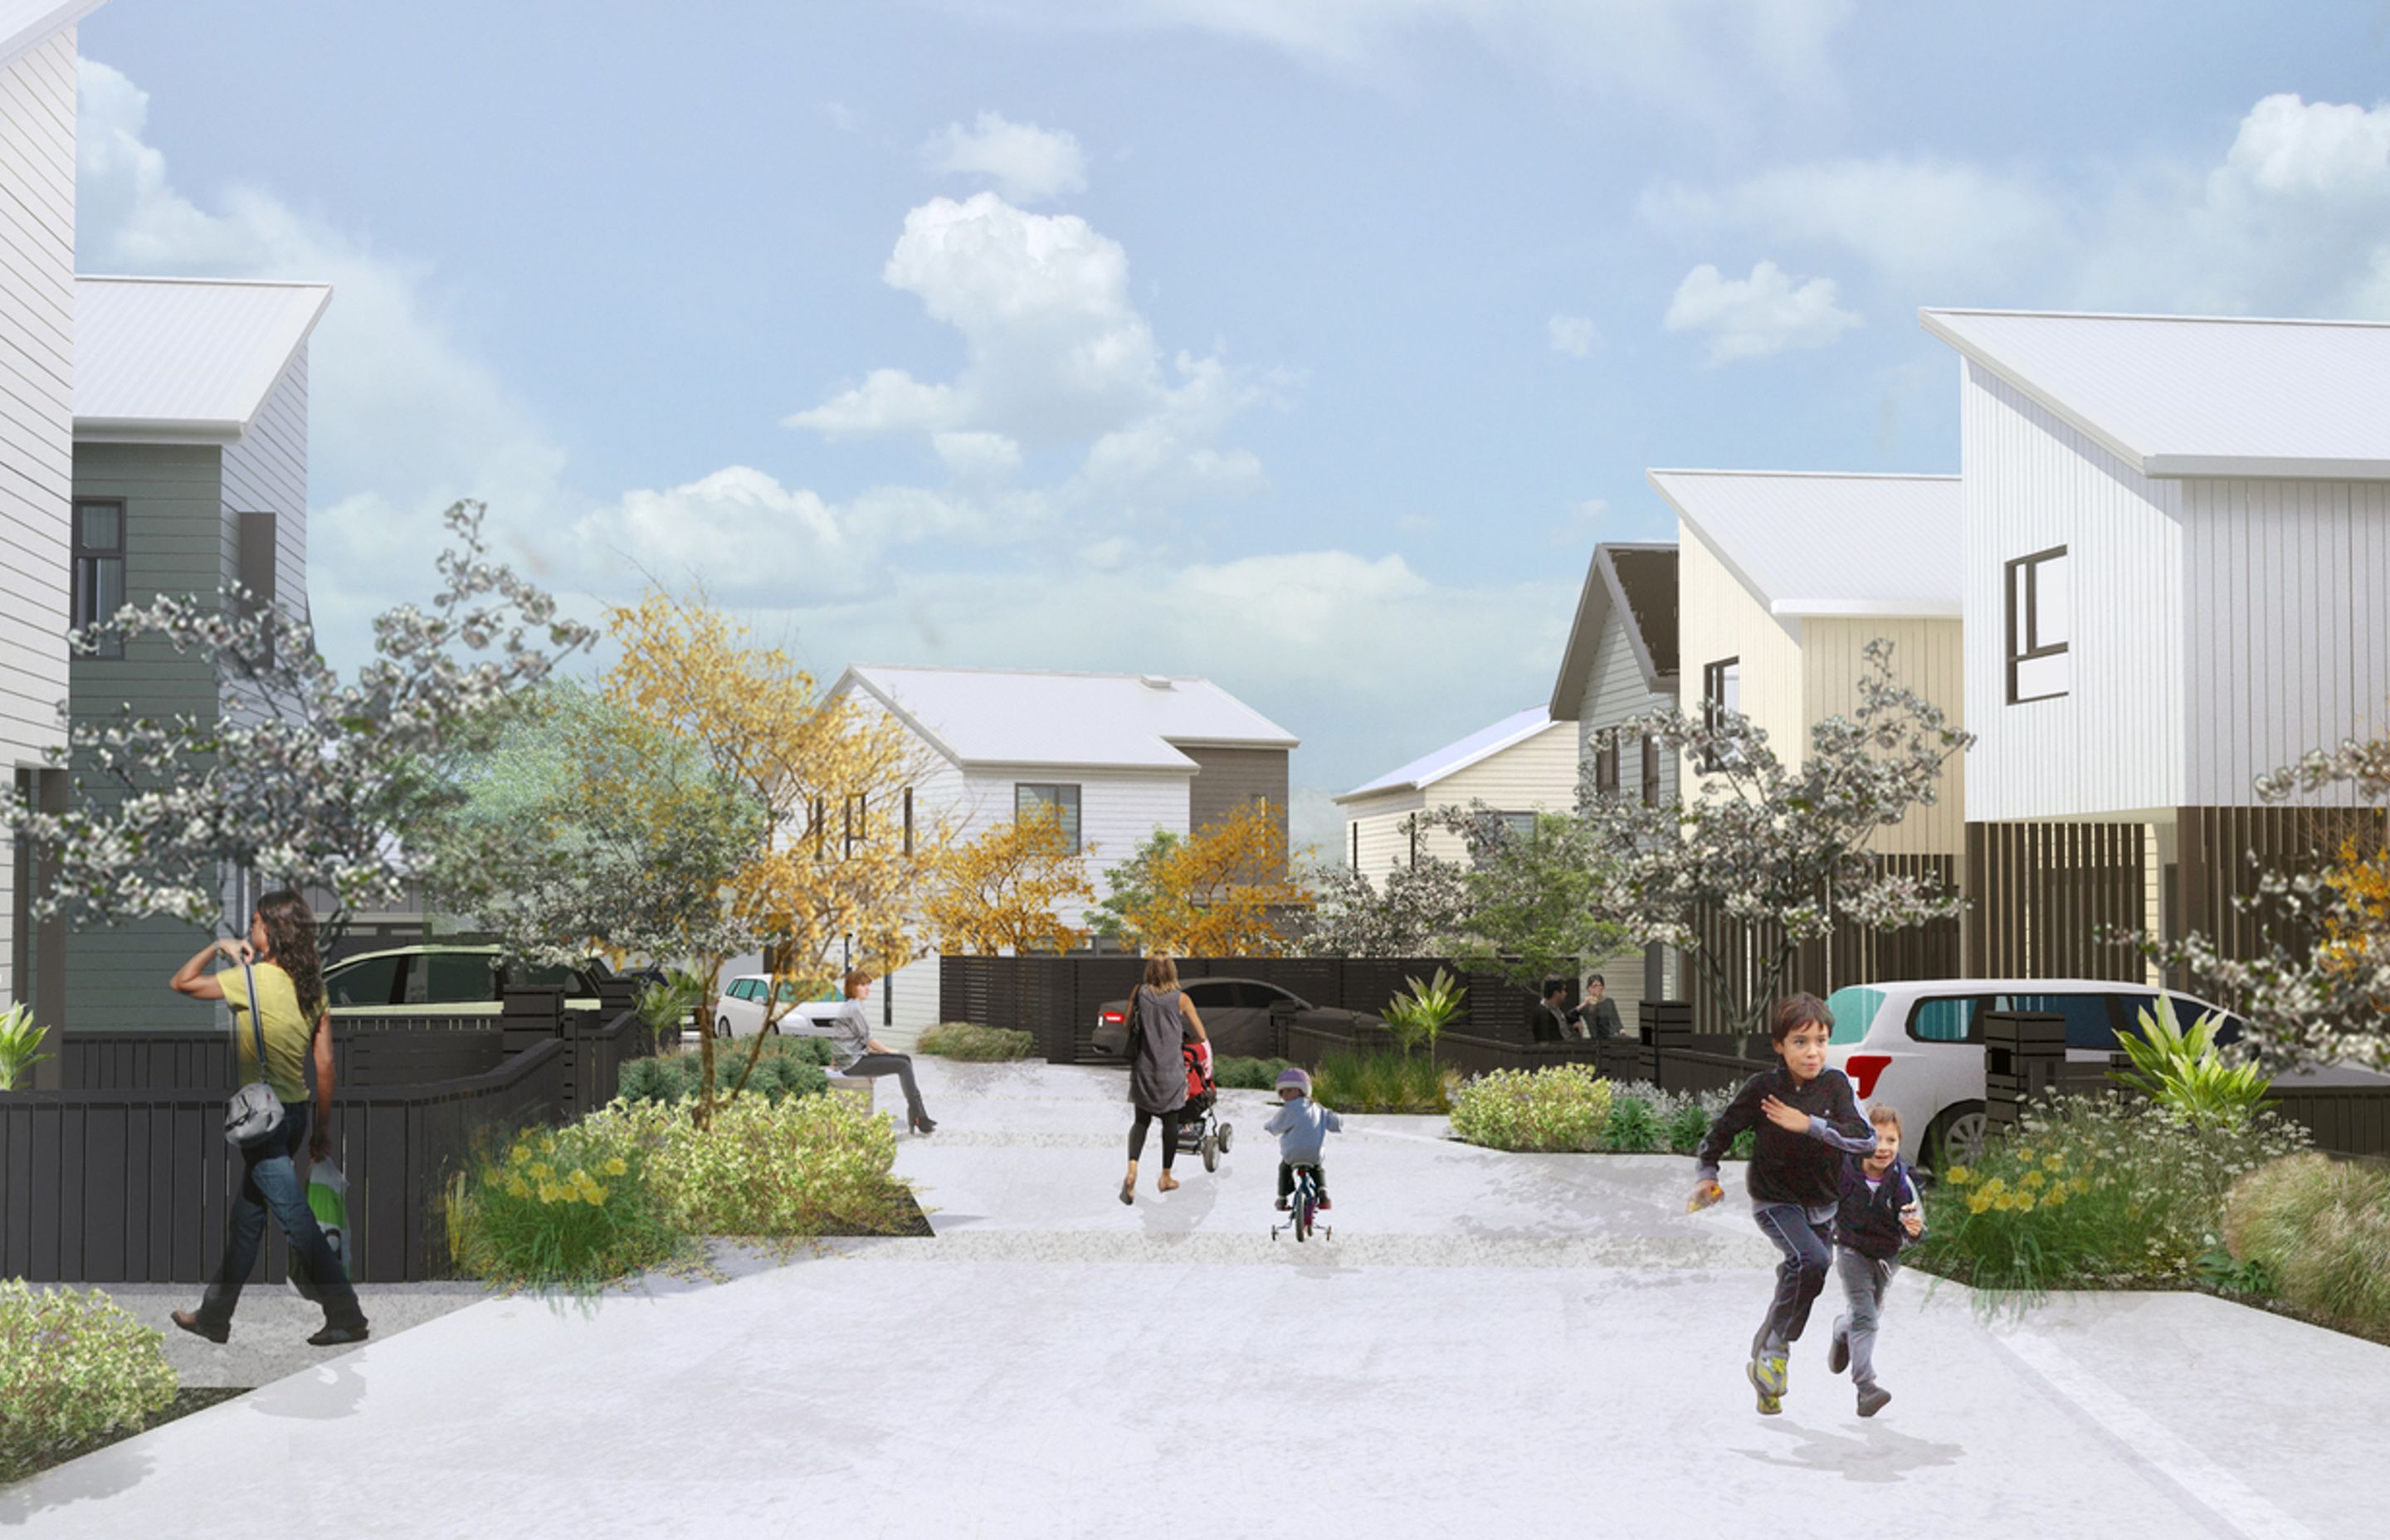 Jasmax has designed 113 new homes for the Fenchurch neighbourhood in Tamaki, Auckland, as part of the Tāmaki Regeneration Programme which will deliver 7500 new homes over the next 10-15 years.